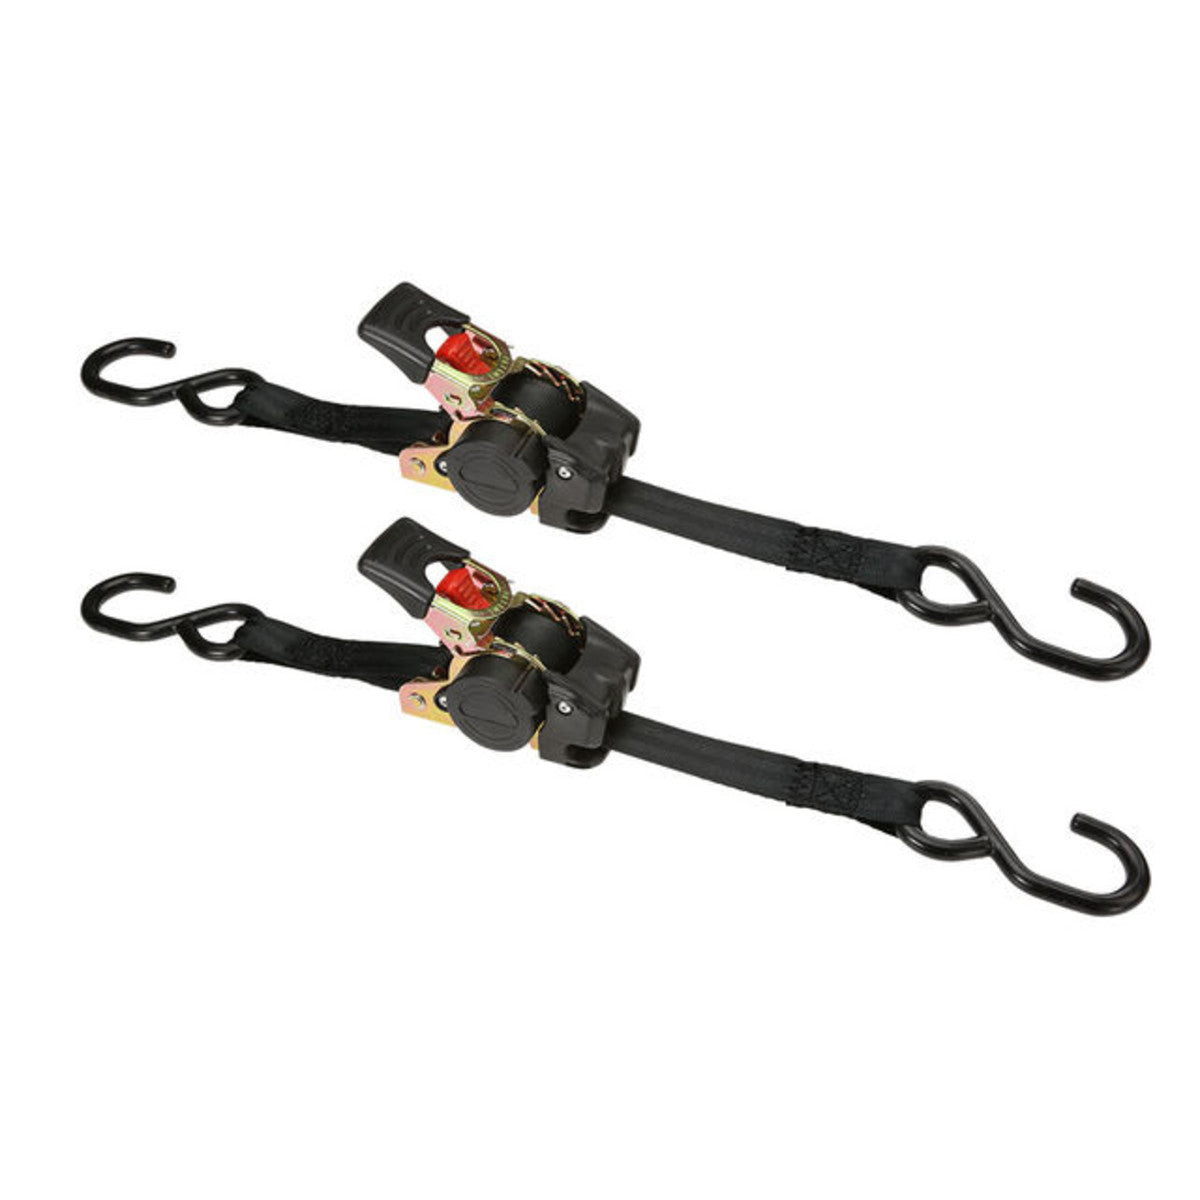 1" x 6' Retractable Ratchet w/ Vinyl Coated S-Hooks and Push Button Release - 2 PK